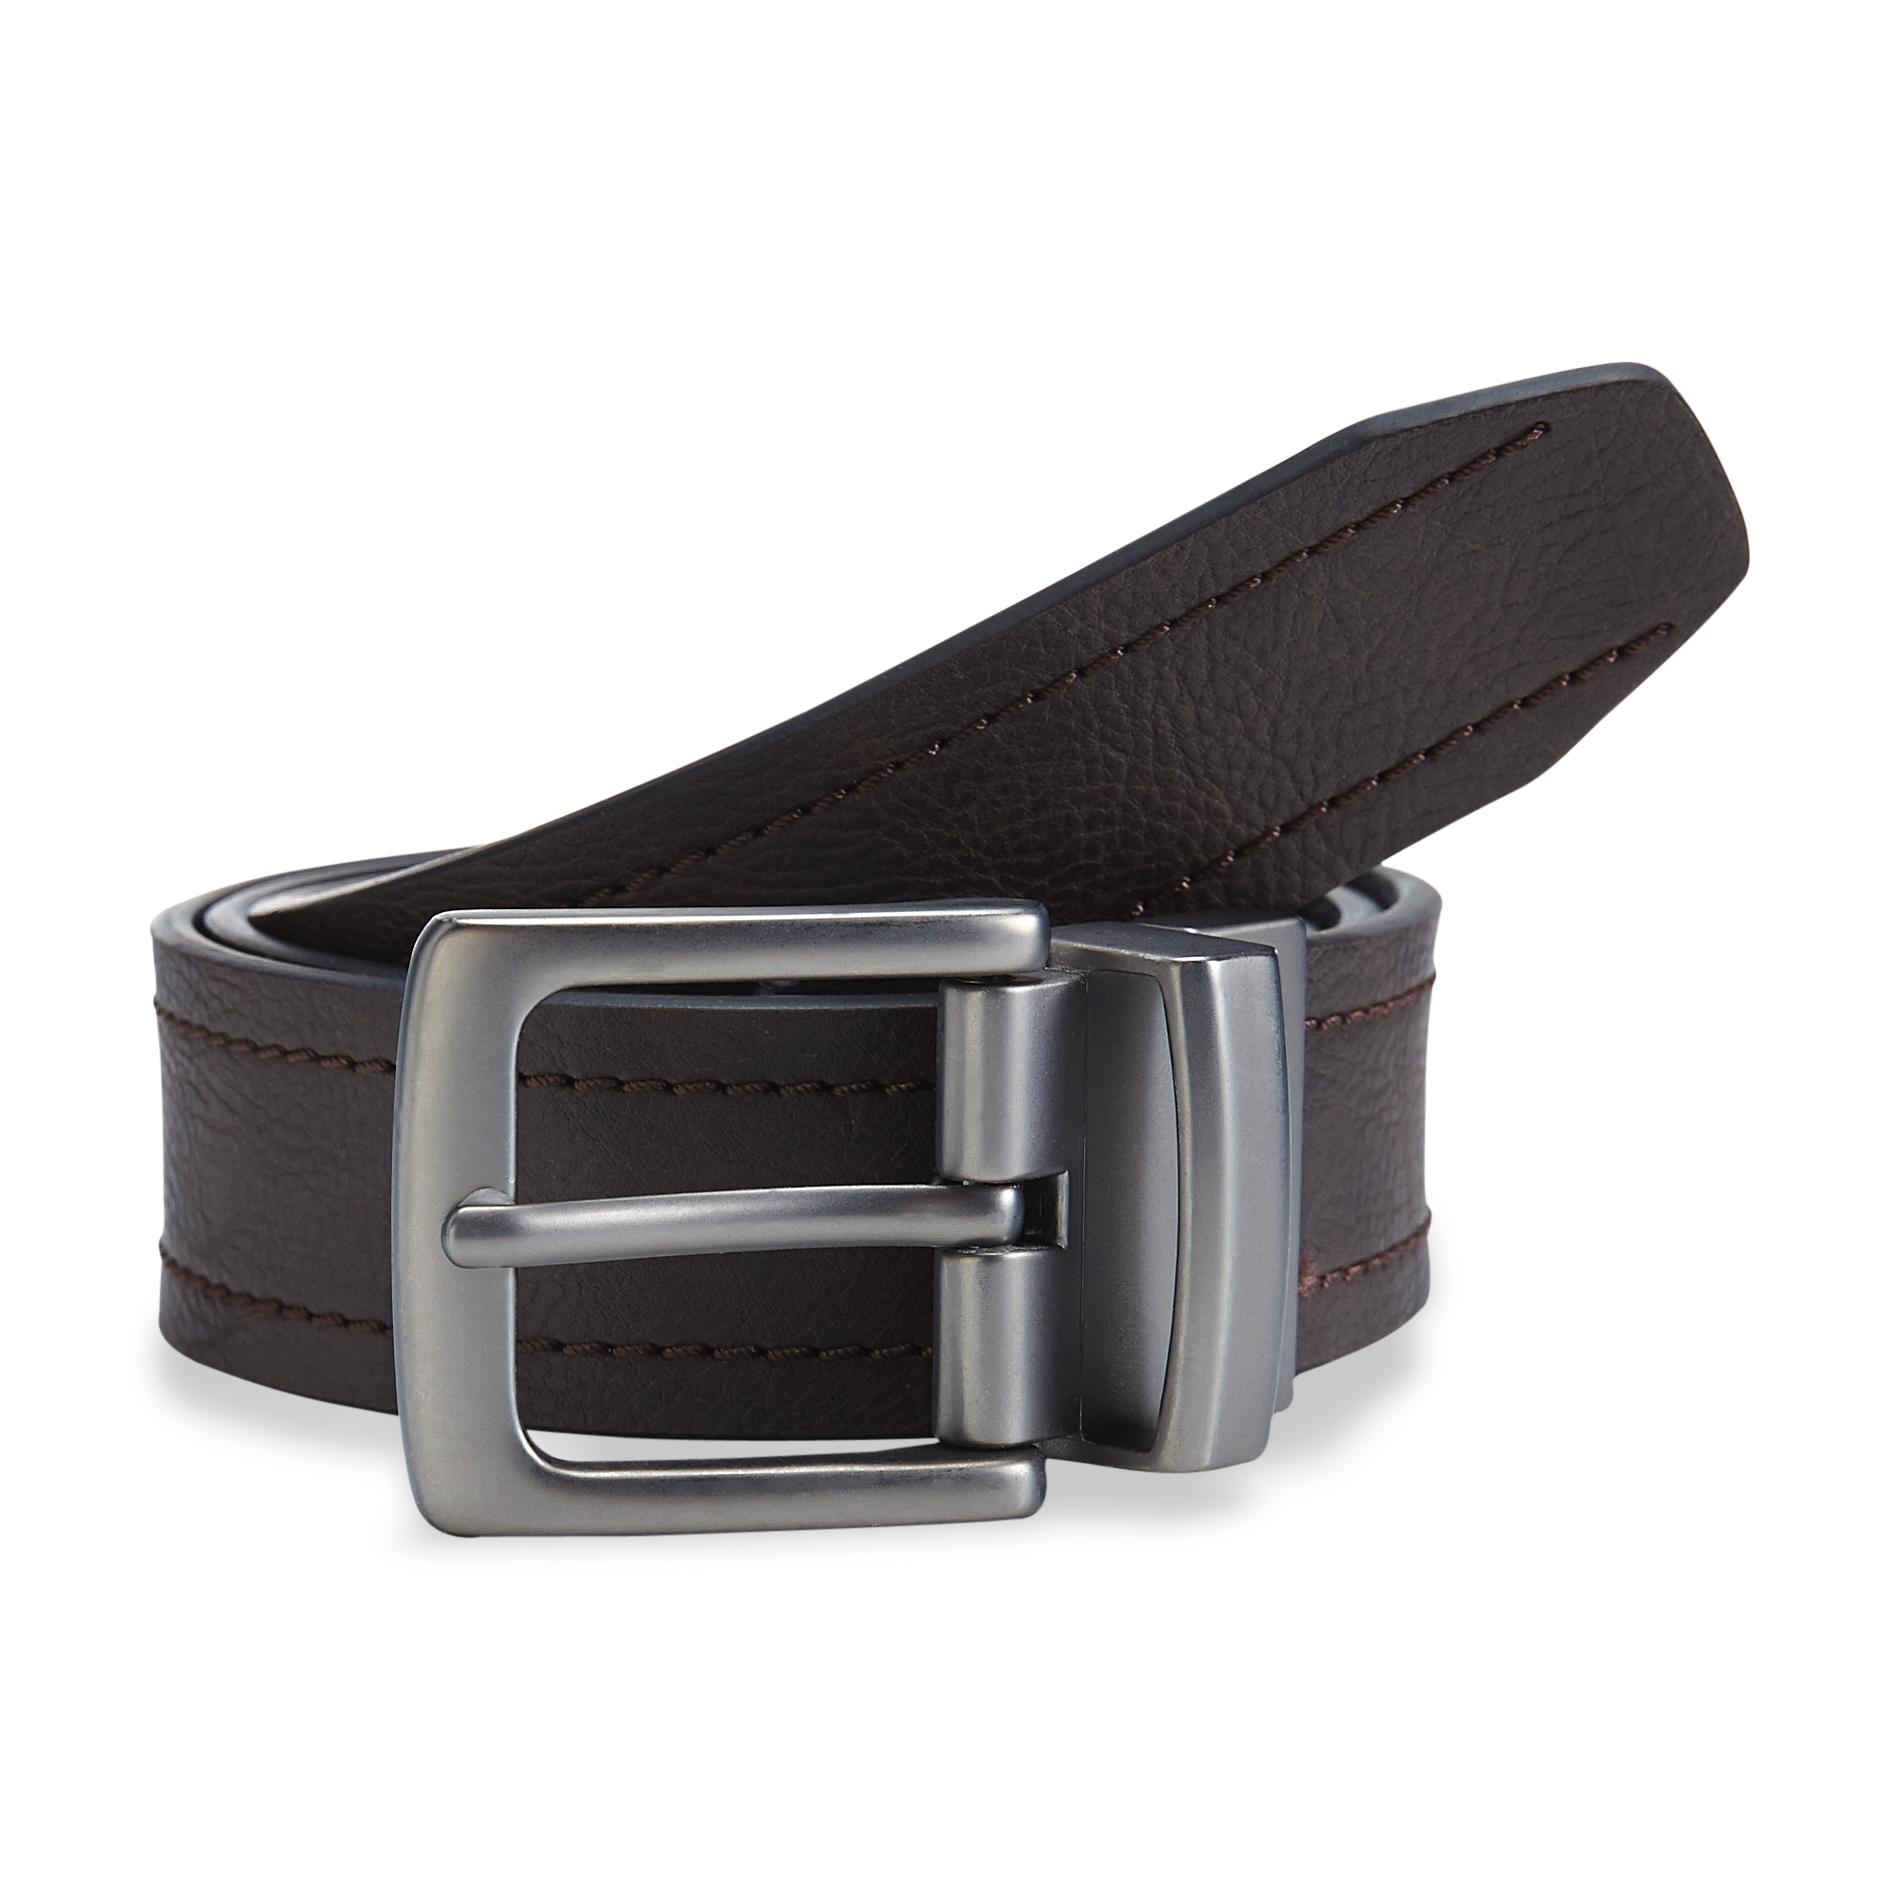 Outdoor Life Men's Casual Matte Finish Leather Belt - Brushed Nickel Buckle